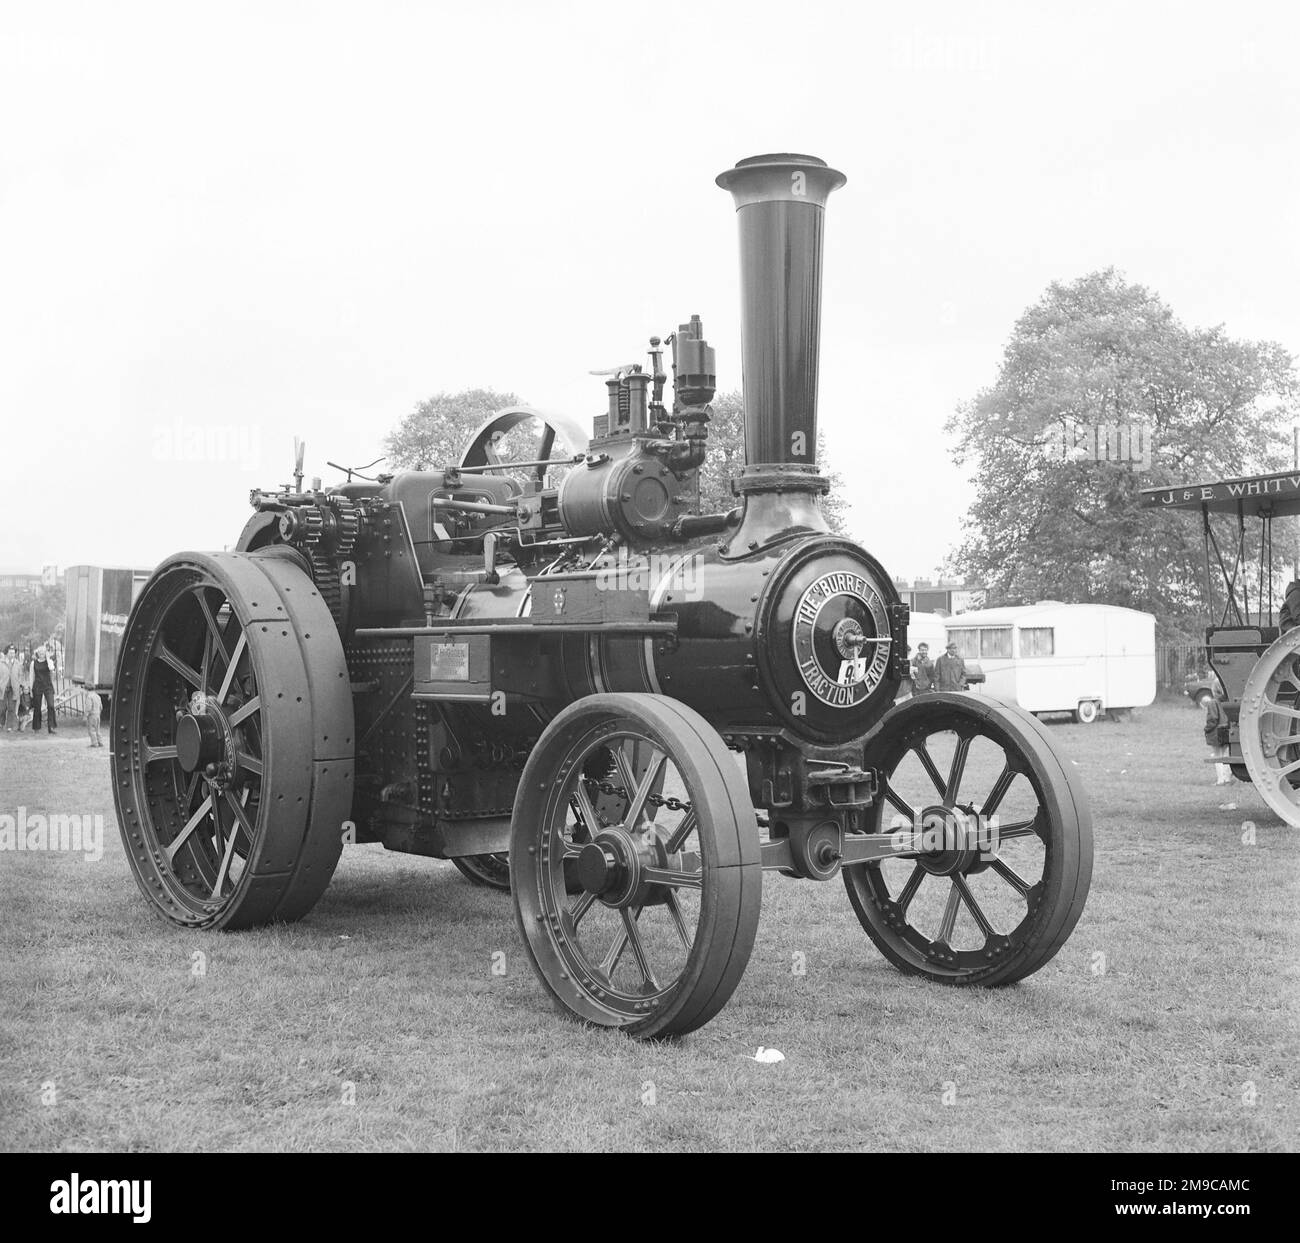 Burrell General Purpose Traction Engine PW 6287 'Firefly' number 4032, with 7nhp single-cylinder Engine, built in 1925. Seen at York on 16 May 1971. (Charles Burrell and Sons were builders of steam traction engines, agricultural machinery, steam lorries and steam tram engines. The company were based in Thetford, Norfolk and operated from the St Nicholas works on Minstergate and St Nicholas Street, some of which survives today). Stock Photo